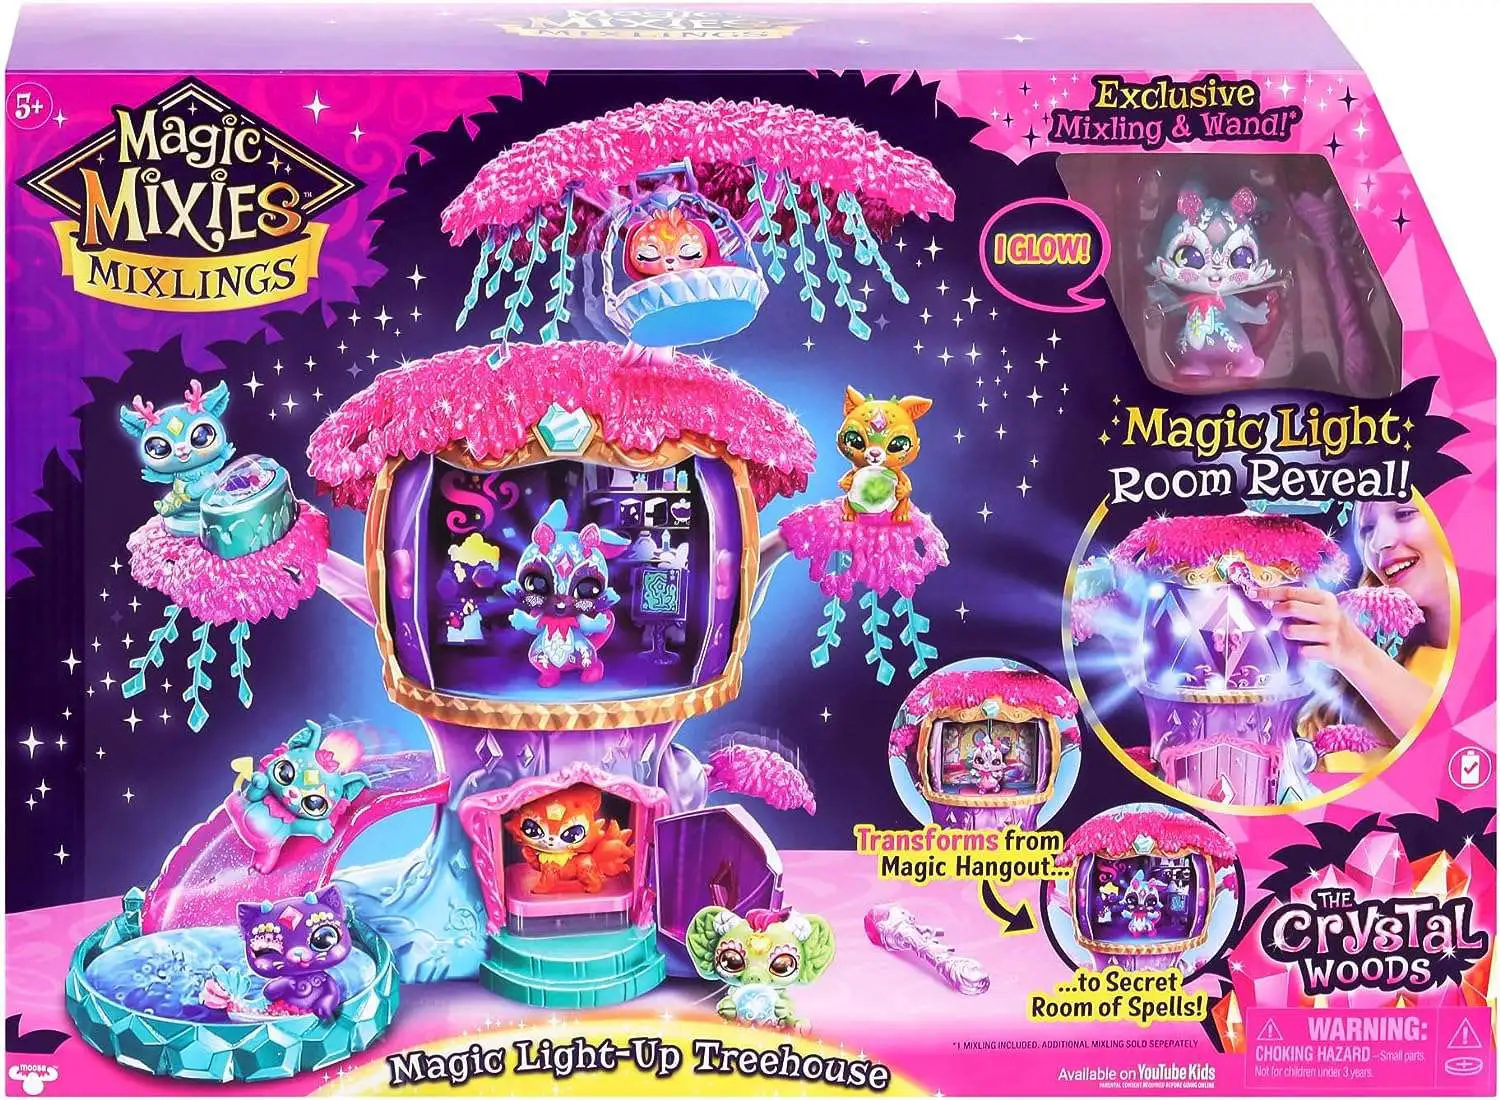 Magic Mixies Magic Potions Truck Playset. Transforms Into A Potion Shop.  Create 3 Spells and Potion Surprises for Your Mixlings. Includes 1  Exclusive